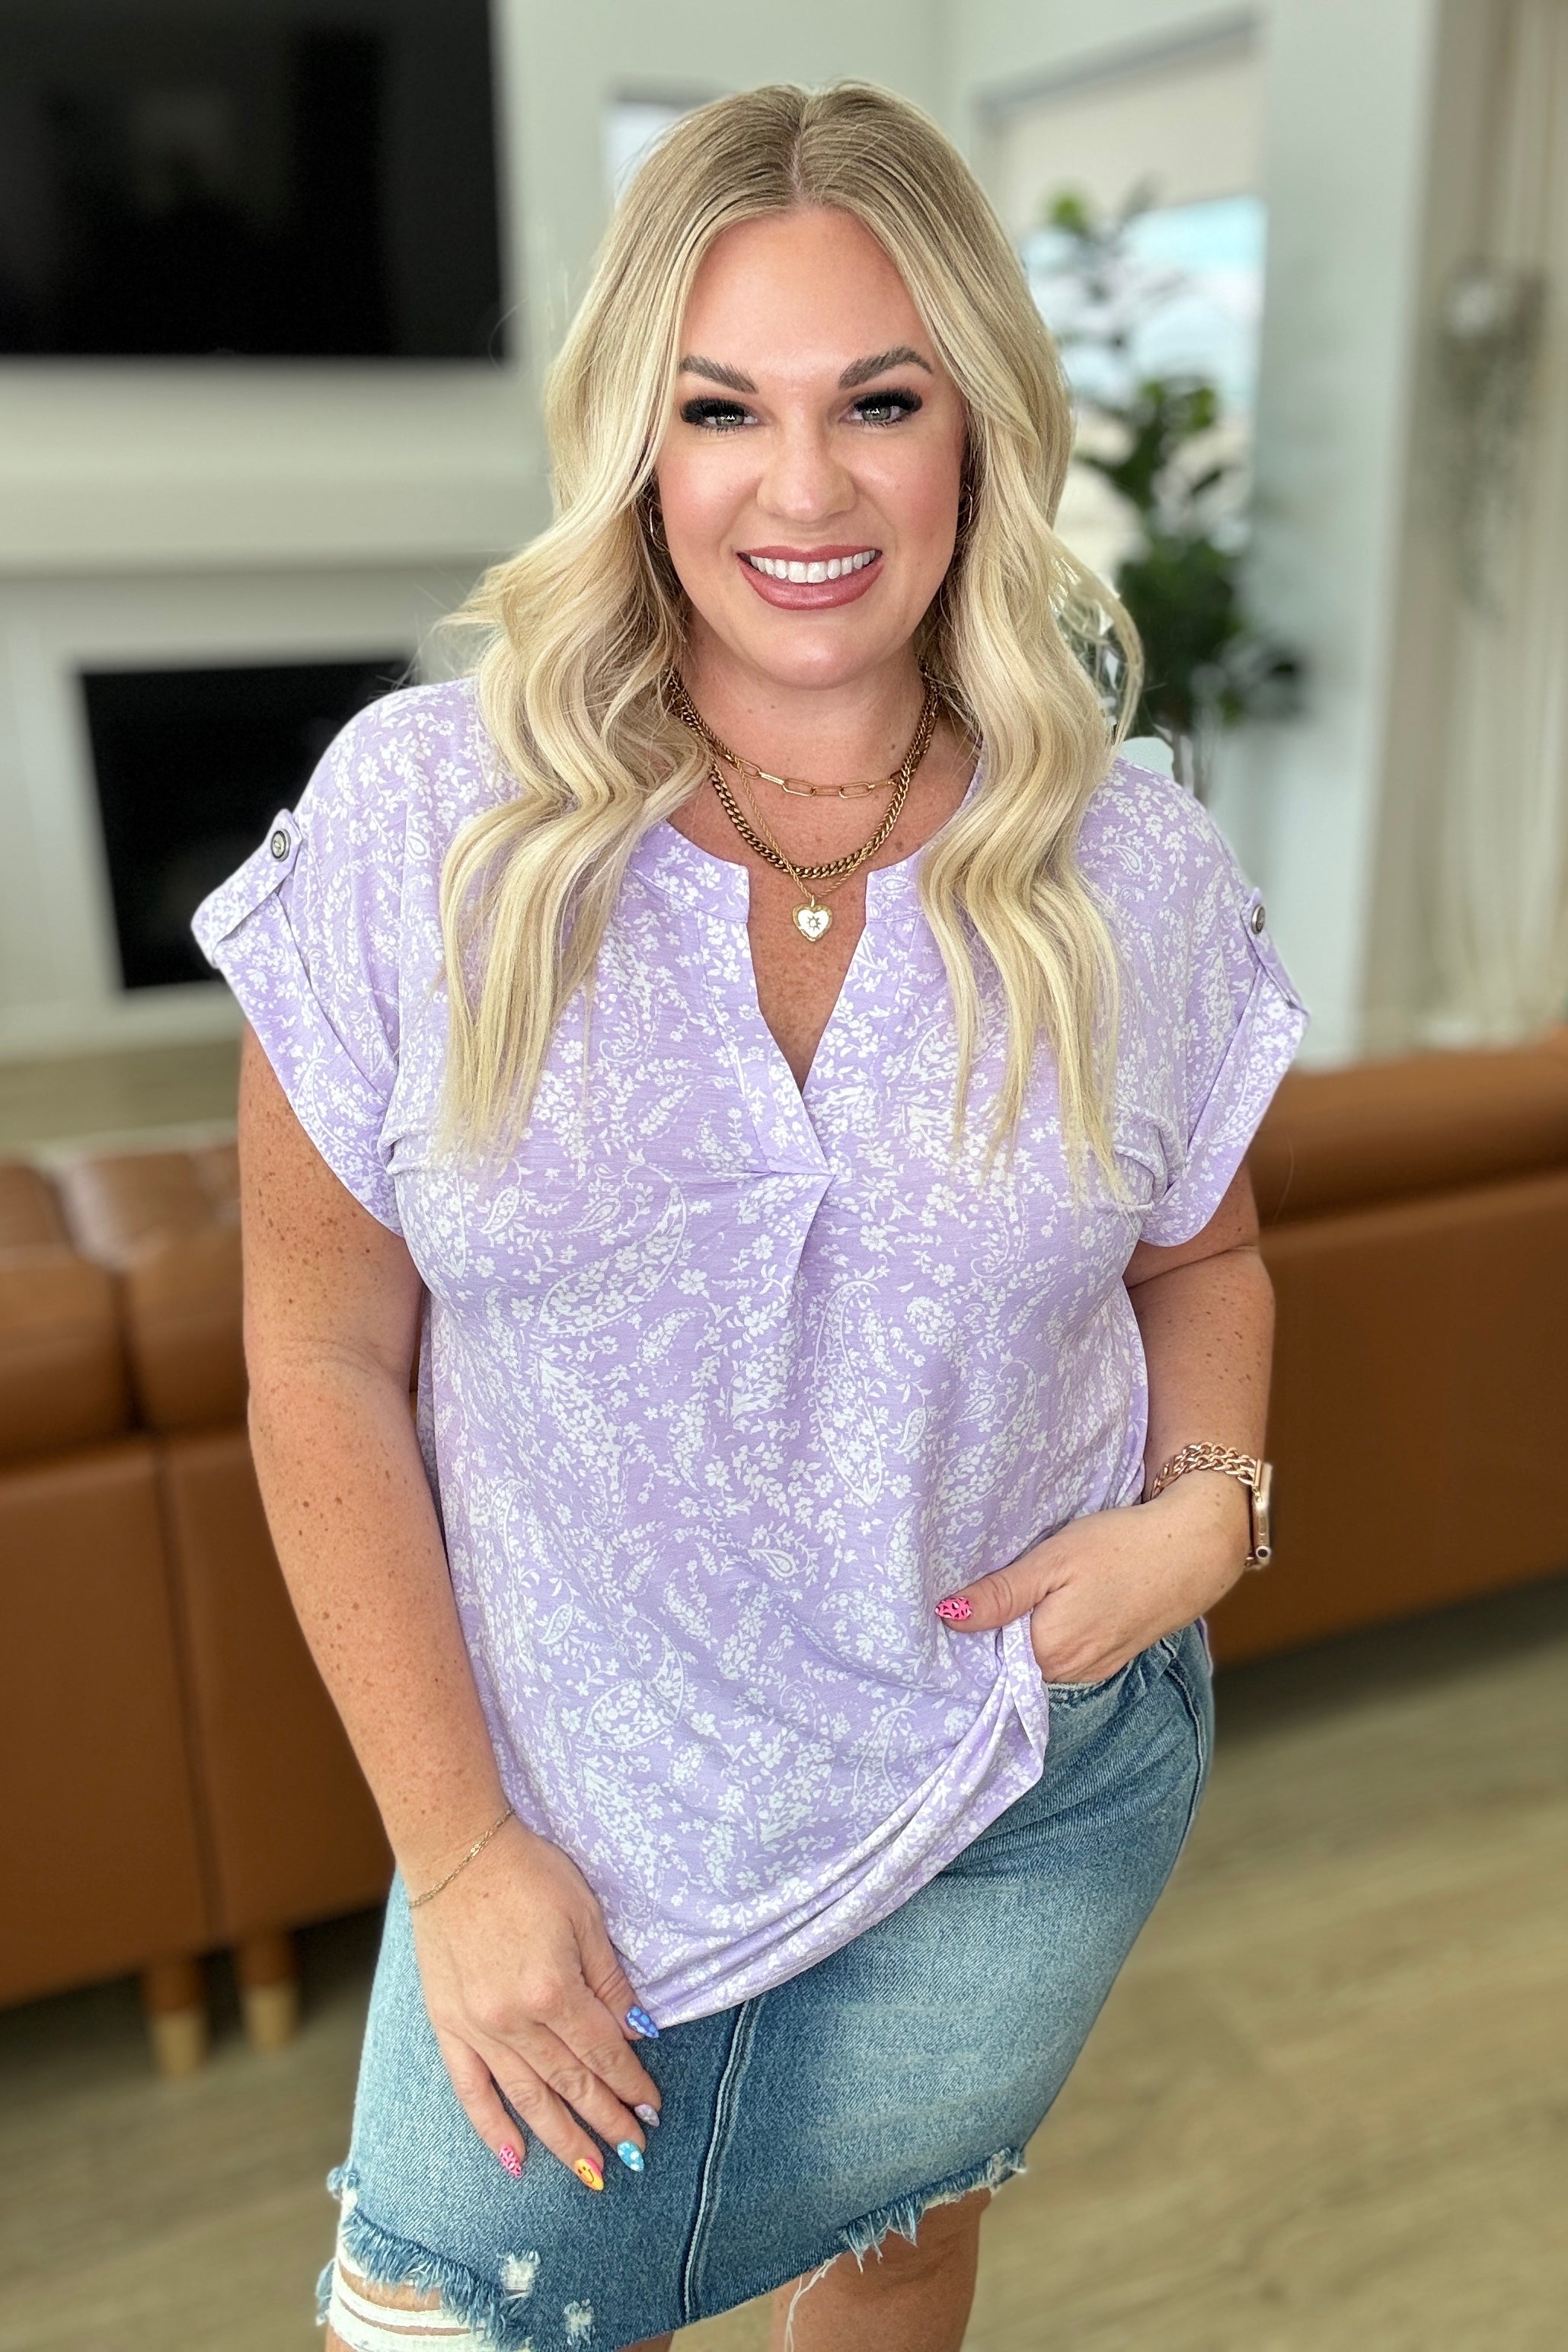 Lizzy Cap Sleeve Top in Lavender and White Floral Tops Ave Shops   